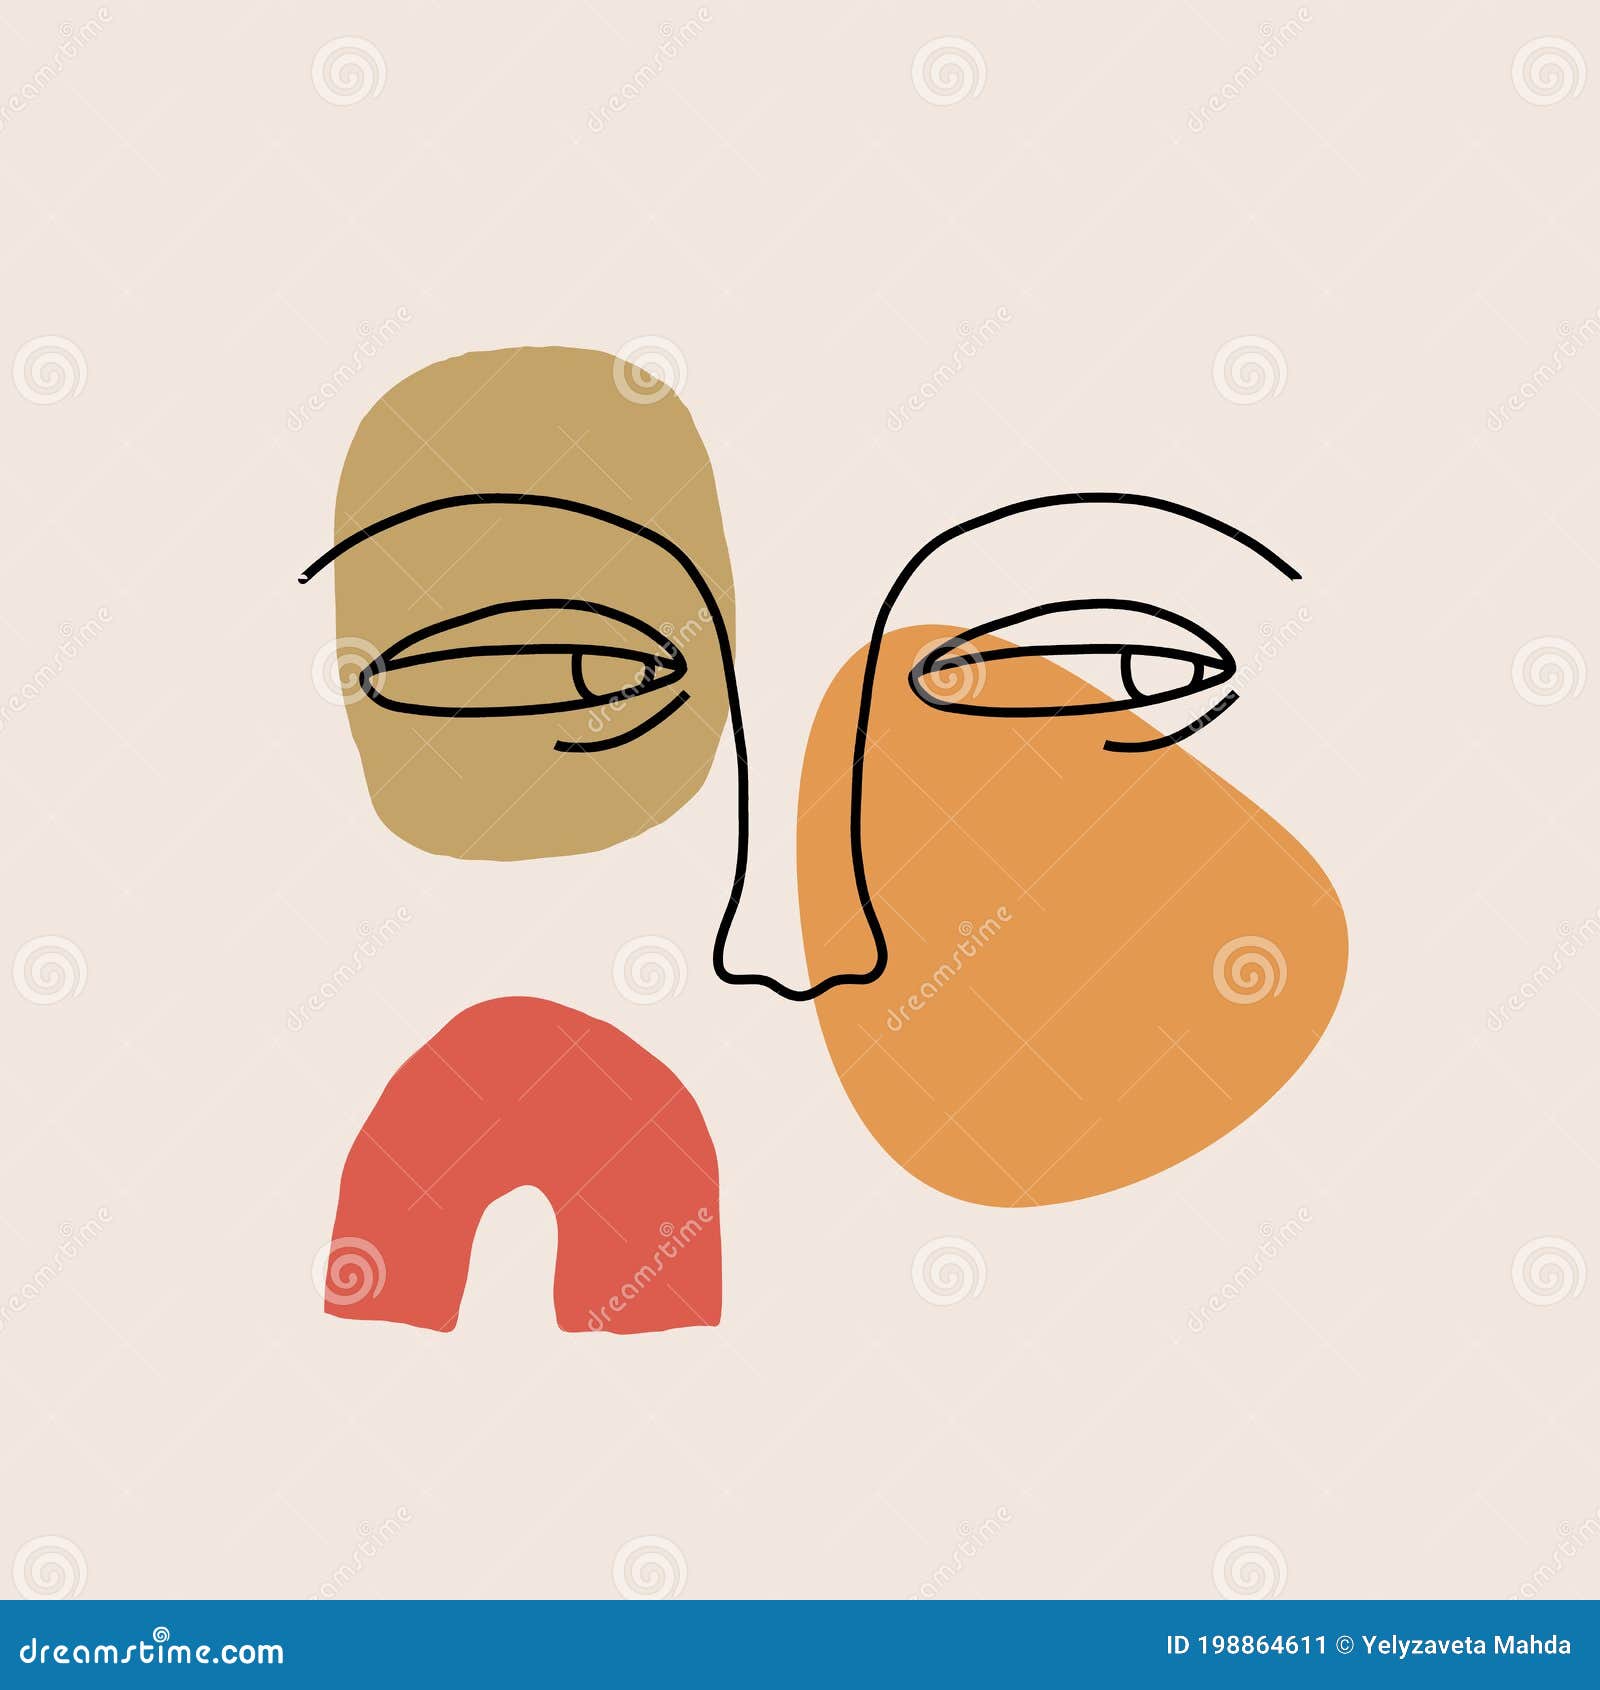 Minimalist Avatar With Retro Color In Diversity With Man And Woman Wearing  Hijab Stock Illustration  Download Image Now  iStock